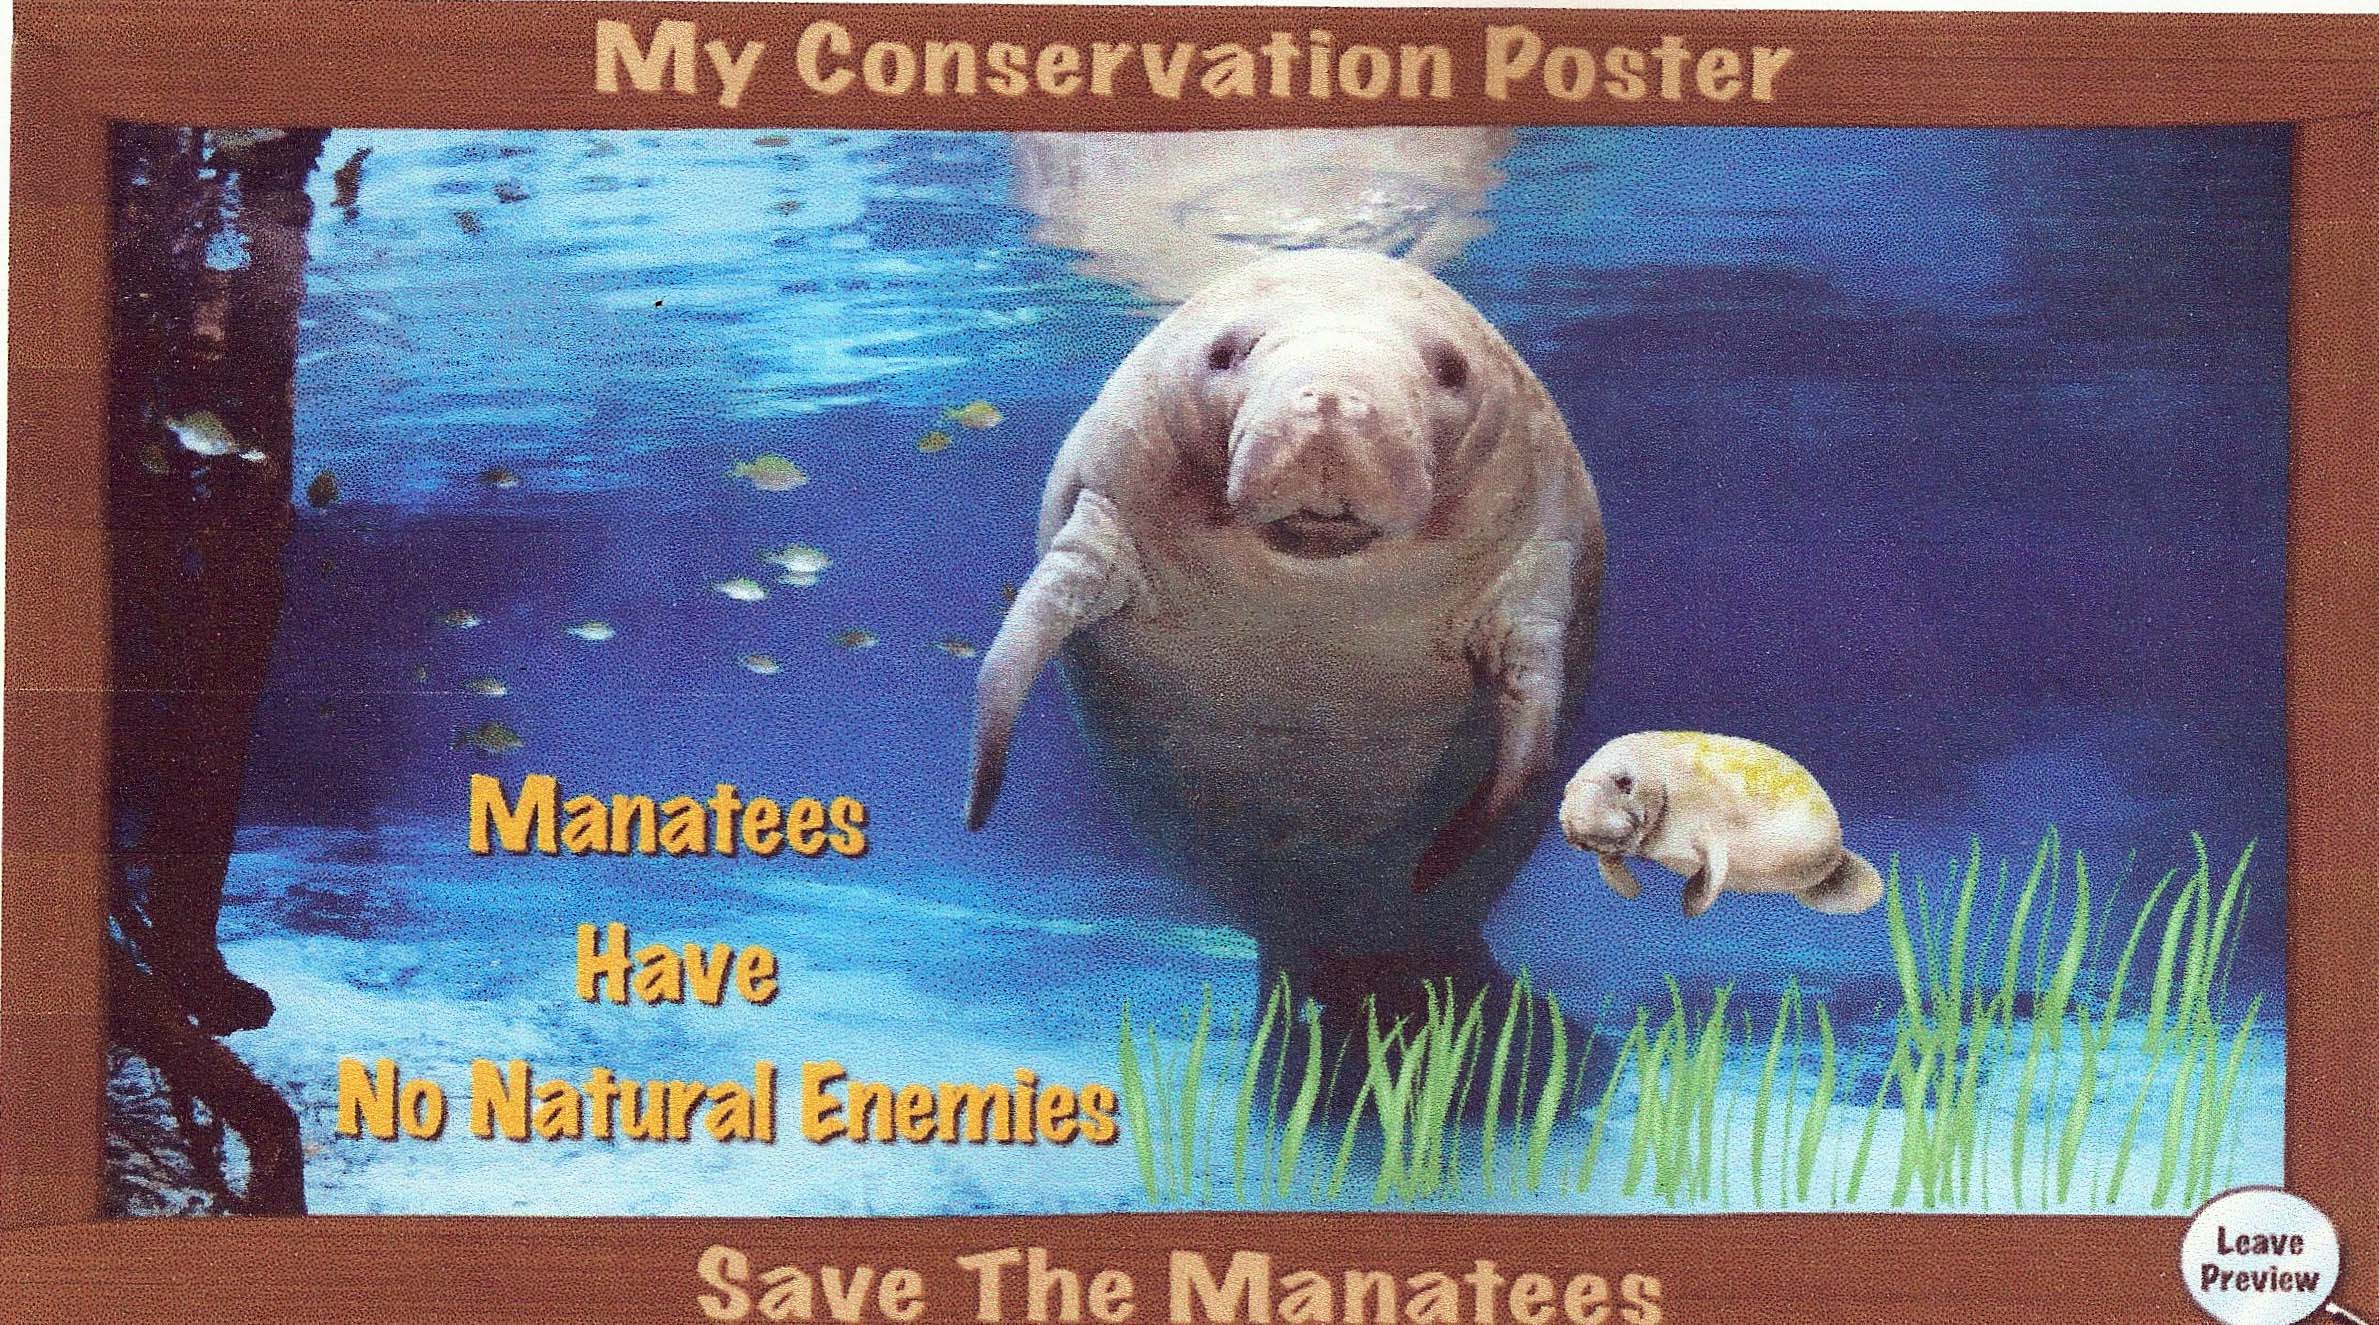 Show Me Your Manatee Conservation Poster!